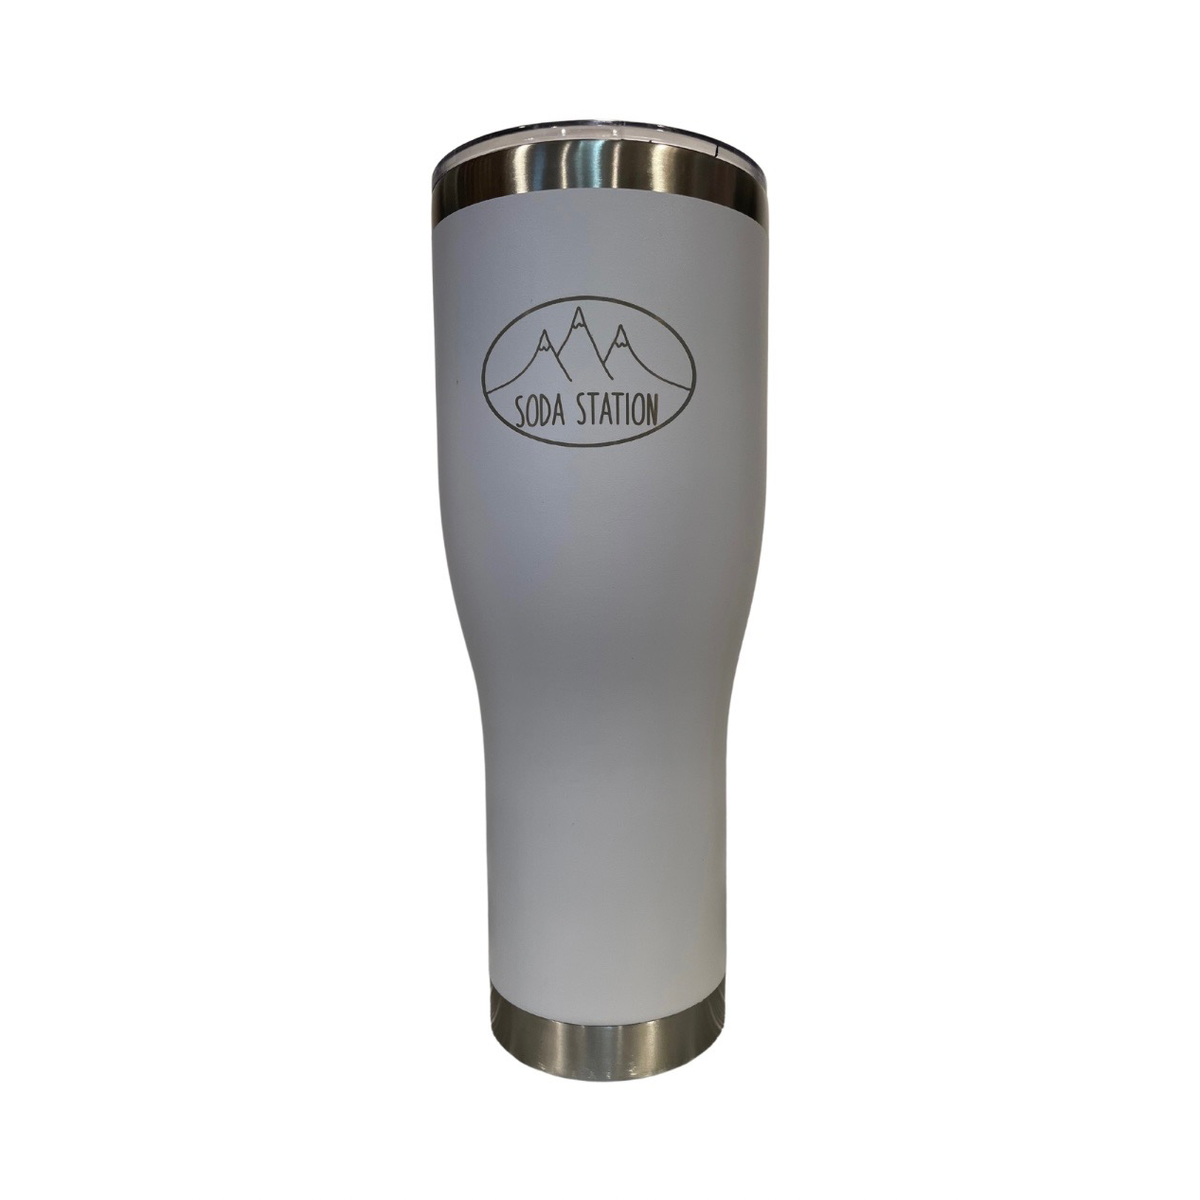 Kosmos Q 40 oz Tumbler - Stays Hot Or Cold For Hours